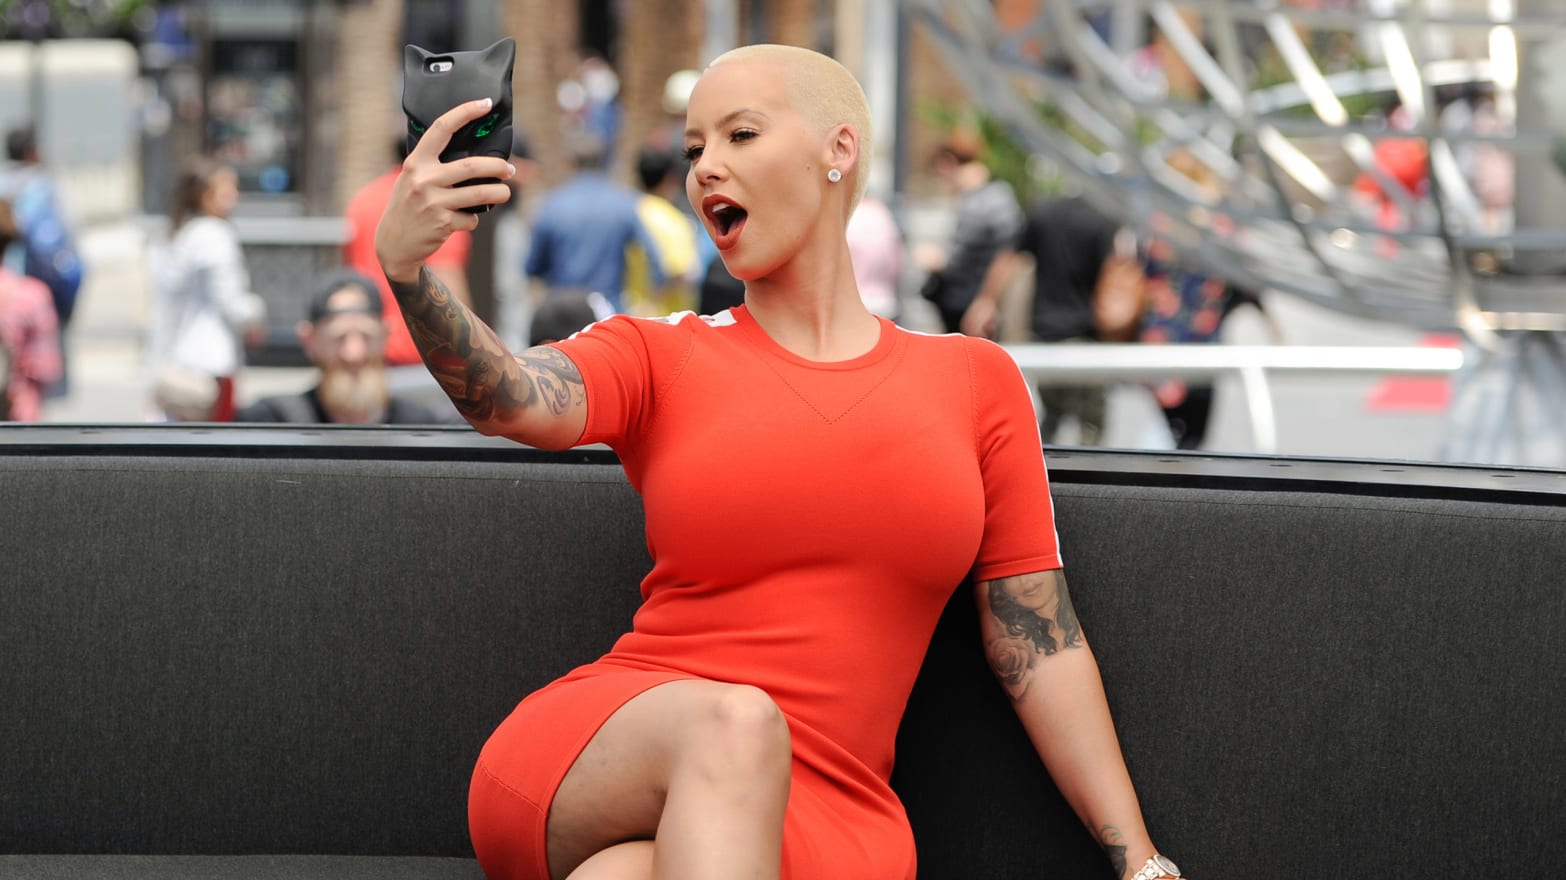 Amber Rose on the Ian Connor Rape Allegations 21 Women Have Reached Out to Me So Far